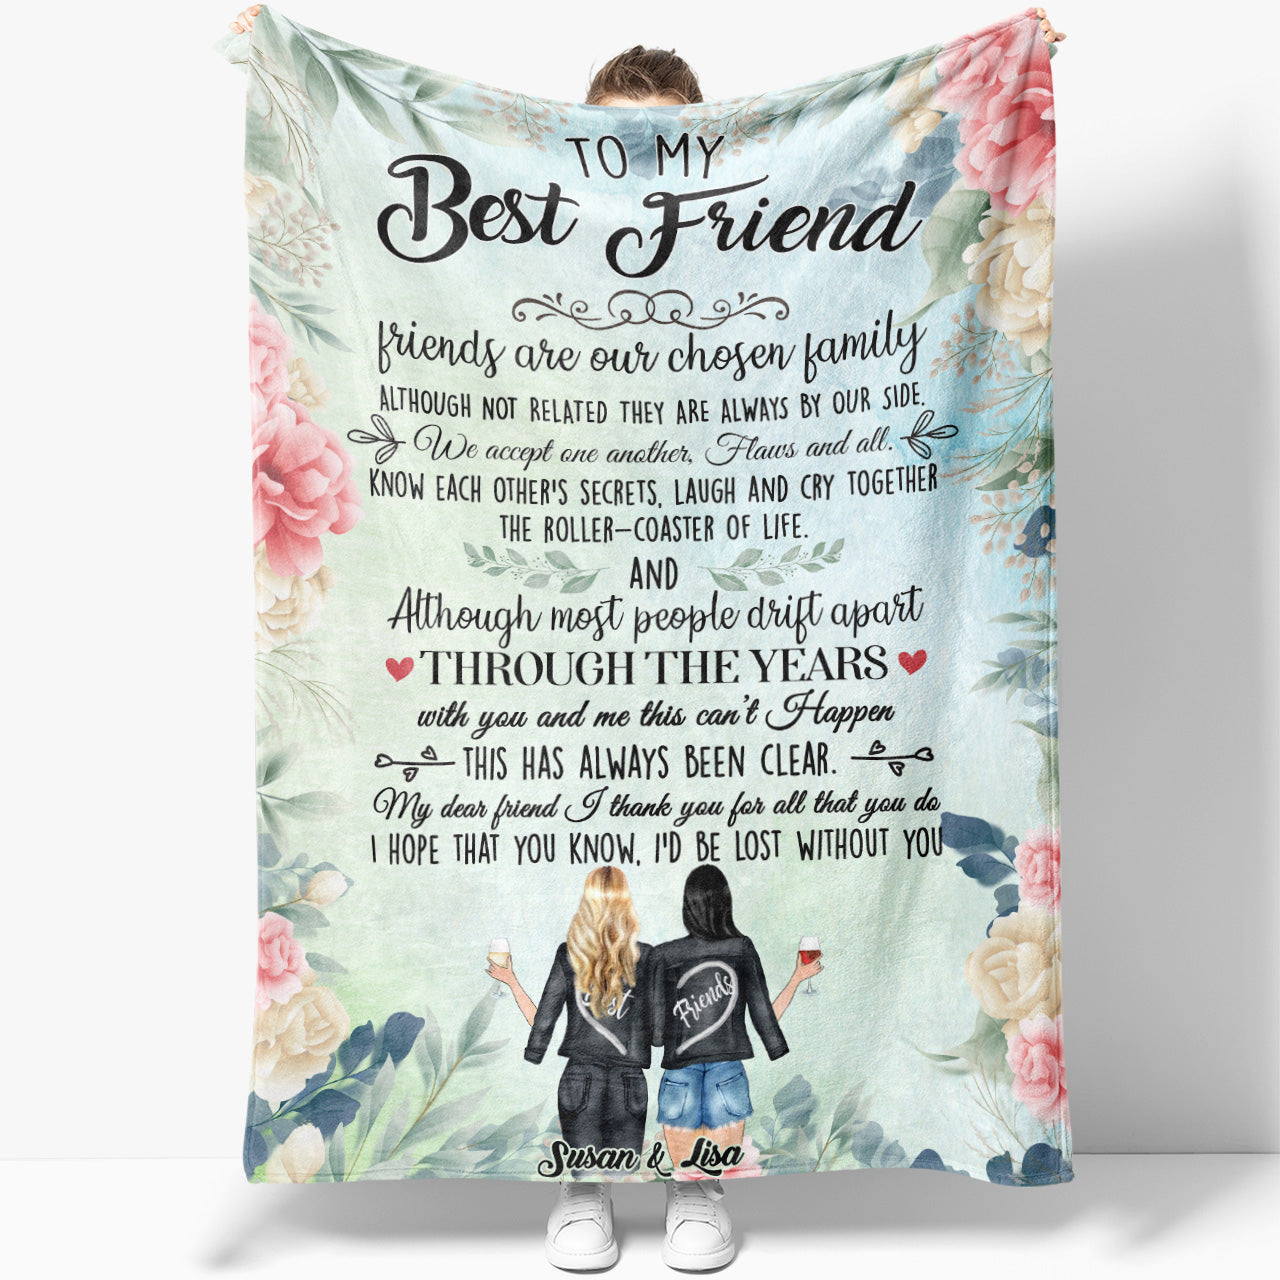 Personalized Blanket Gift Ideas for Best Friend, Friends Are Our Chosen Family Blanket